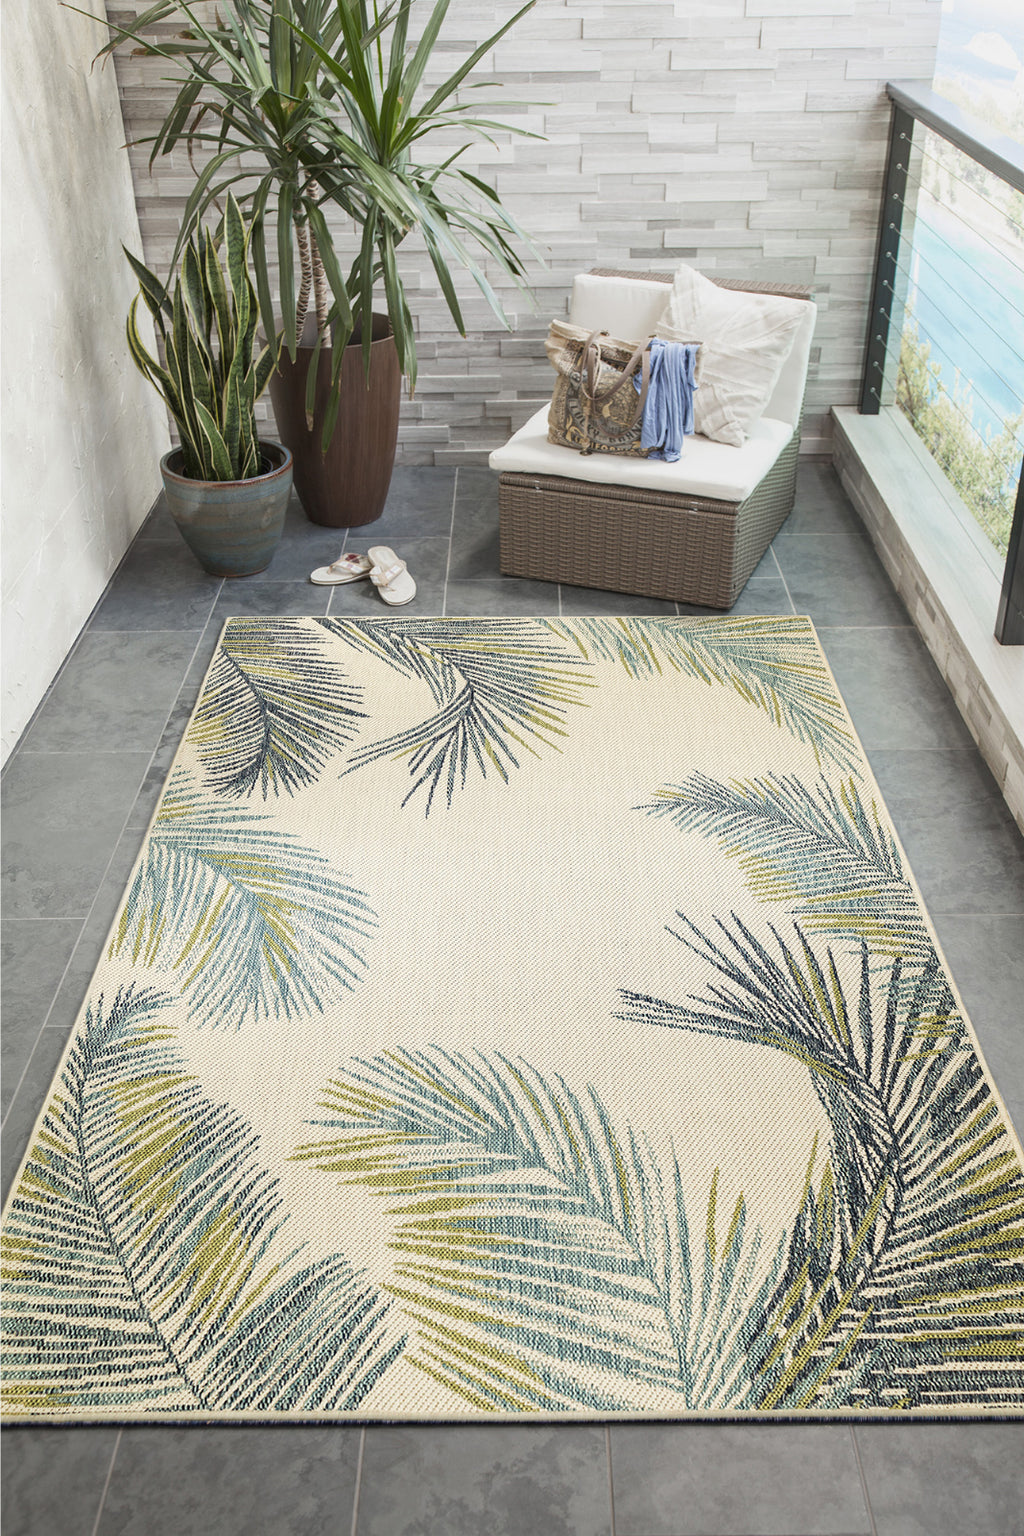 Trans Ocean Portofino 7082/02 Palm Border Ivory Area Rug by Liora Manne Room Scene Image Feature